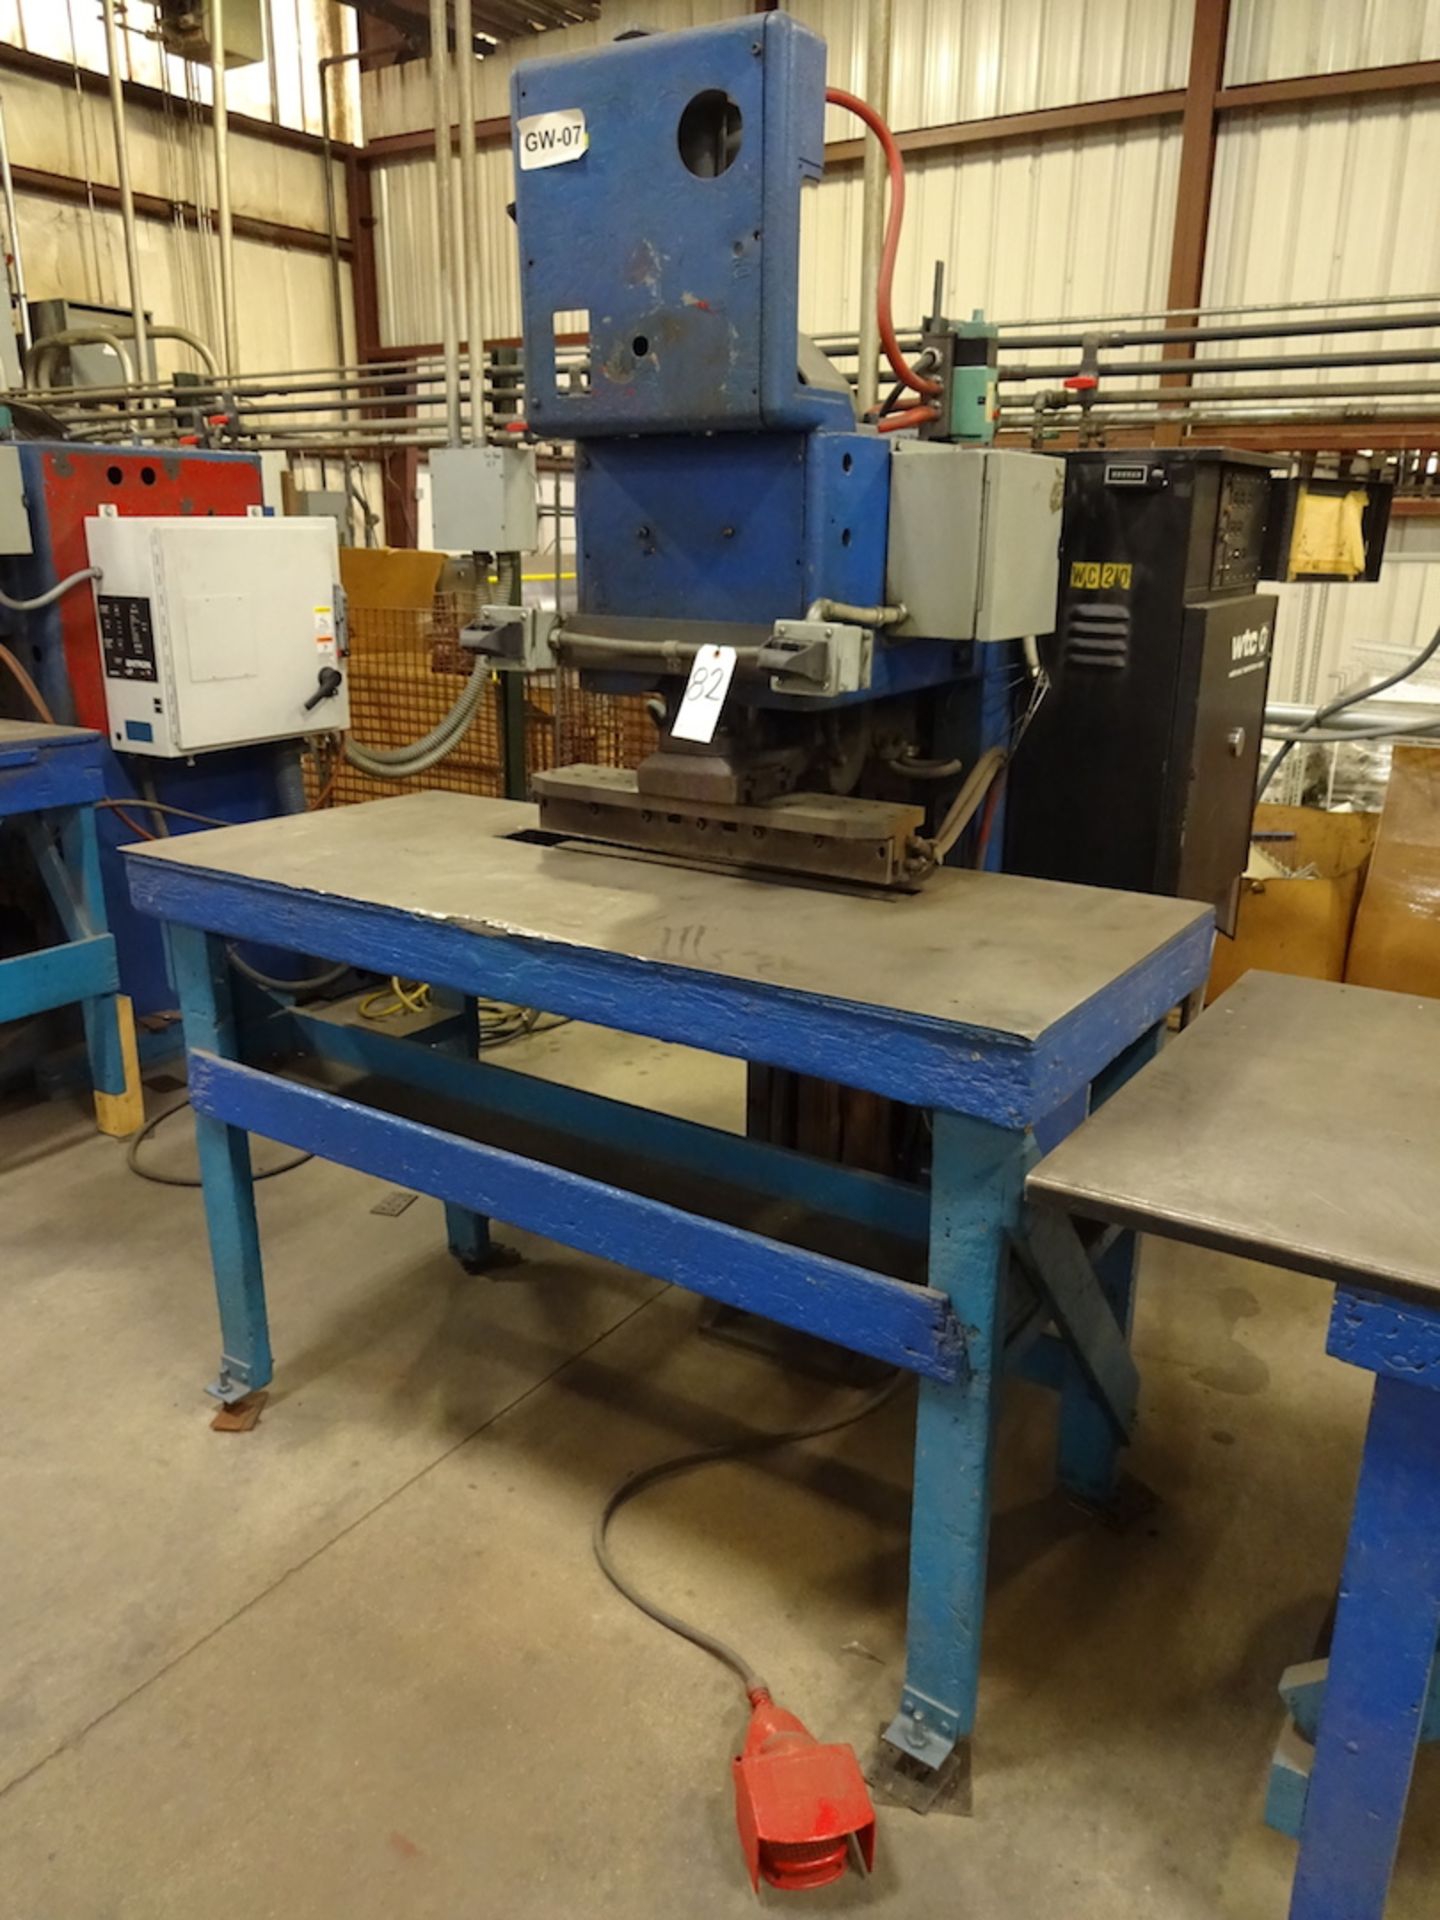 Thompson 150 KVA Model A2 Spot Welder, S/N 18009, MCS2009 Micro Controlled System Control